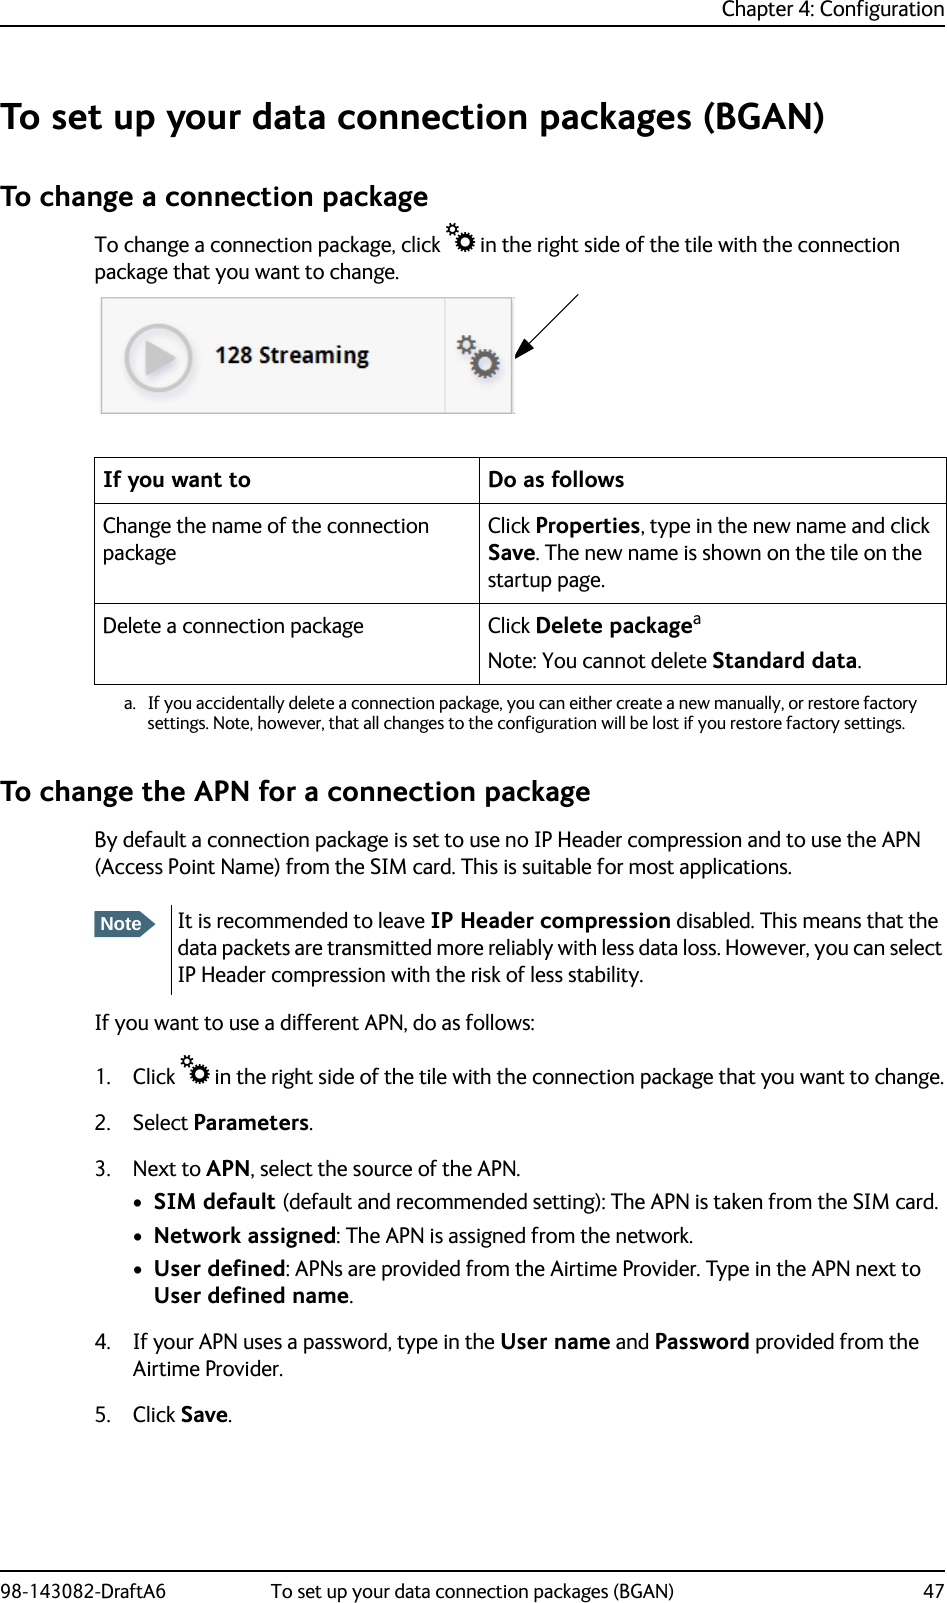 Chapter 4: Configuration98-143082-DraftA6 To set up your data connection packages (BGAN) 47To set up your data connection packages (BGAN)To change a connection packageTo change a connection package, click  in the right side of the tile with the connection package that you want to change.To change the APN for a connection packageBy default a connection package is set to use no IP Header compression and to use the APN (Access Point Name) from the SIM card. This is suitable for most applications.If you want to use a different APN, do as follows:1. Click  in the right side of the tile with the connection package that you want to change.2. Select Parameters.3. Next to APN, select the source of the APN.•SIM default (default and recommended setting): The APN is taken from the SIM card.•Network assigned: The APN is assigned from the network.•User defined: APNs are provided from the Airtime Provider. Type in the APN next to User defined name.4. If your APN uses a password, type in the User name and Password provided from the Airtime Provider.5. Click Save.If you want to Do as followsChange the name of the connection packageClick Properties, type in the new name and click Save. The new name is shown on the tile on the startup page.Delete a connection package Click Delete packageaNote: You cannot delete Standard data.a. If you accidentally delete a connection package, you can either create a new manually, or restore factorysettings. Note, however, that all changes to the configuration will be lost if you restore factory settings.NoteIt is recommended to leave IP Header compression disabled. This means that the data packets are transmitted more reliably with less data loss. However, you can select IP Header compression with the risk of less stability.